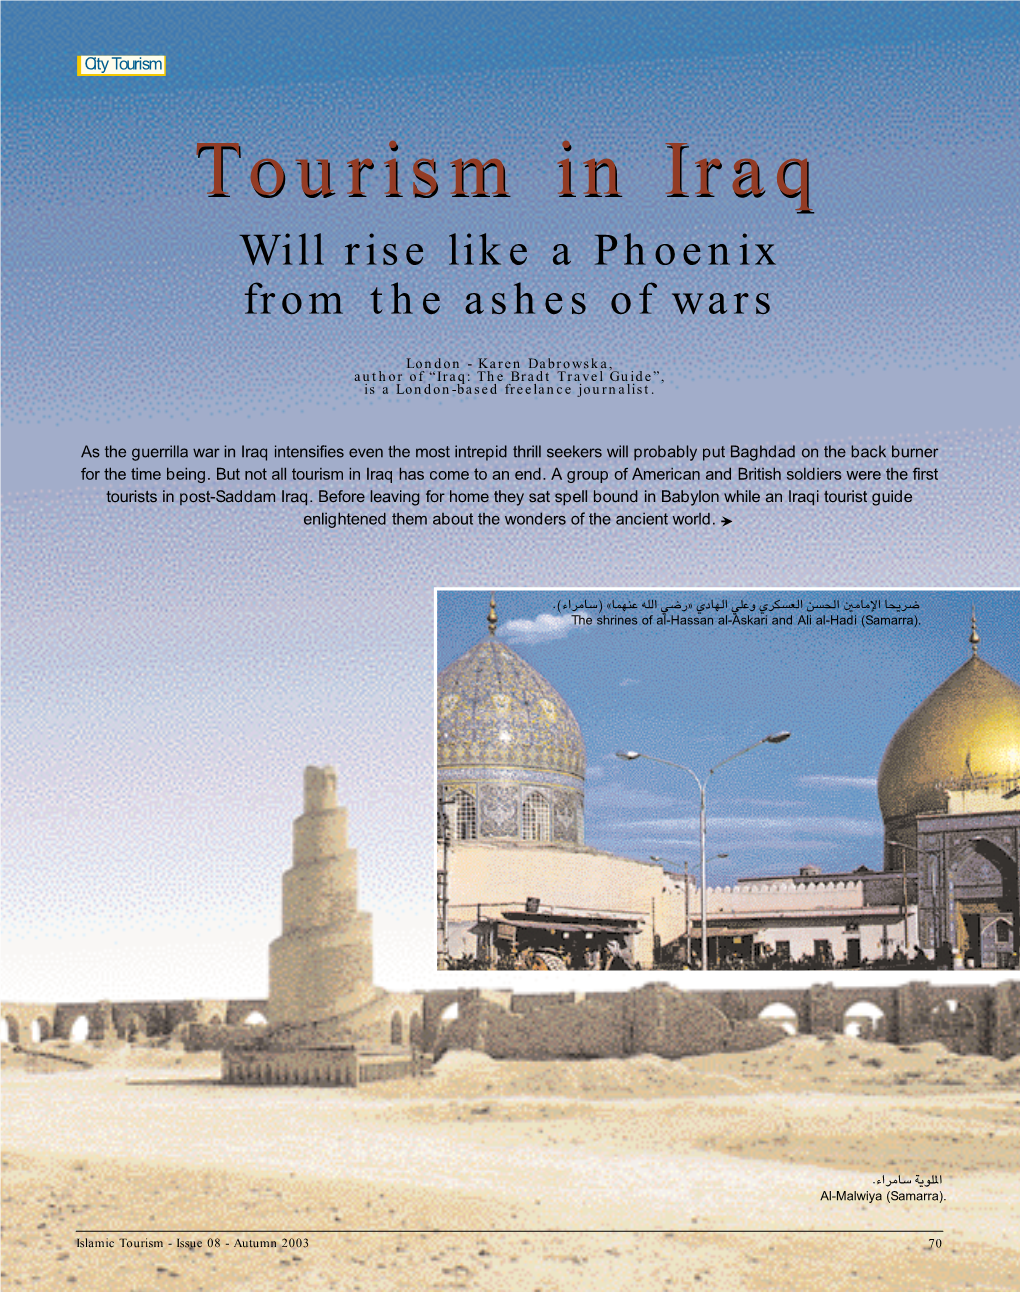 Tourism in Iraq Will Rise Like a Phoenix from the Ashes of Wars